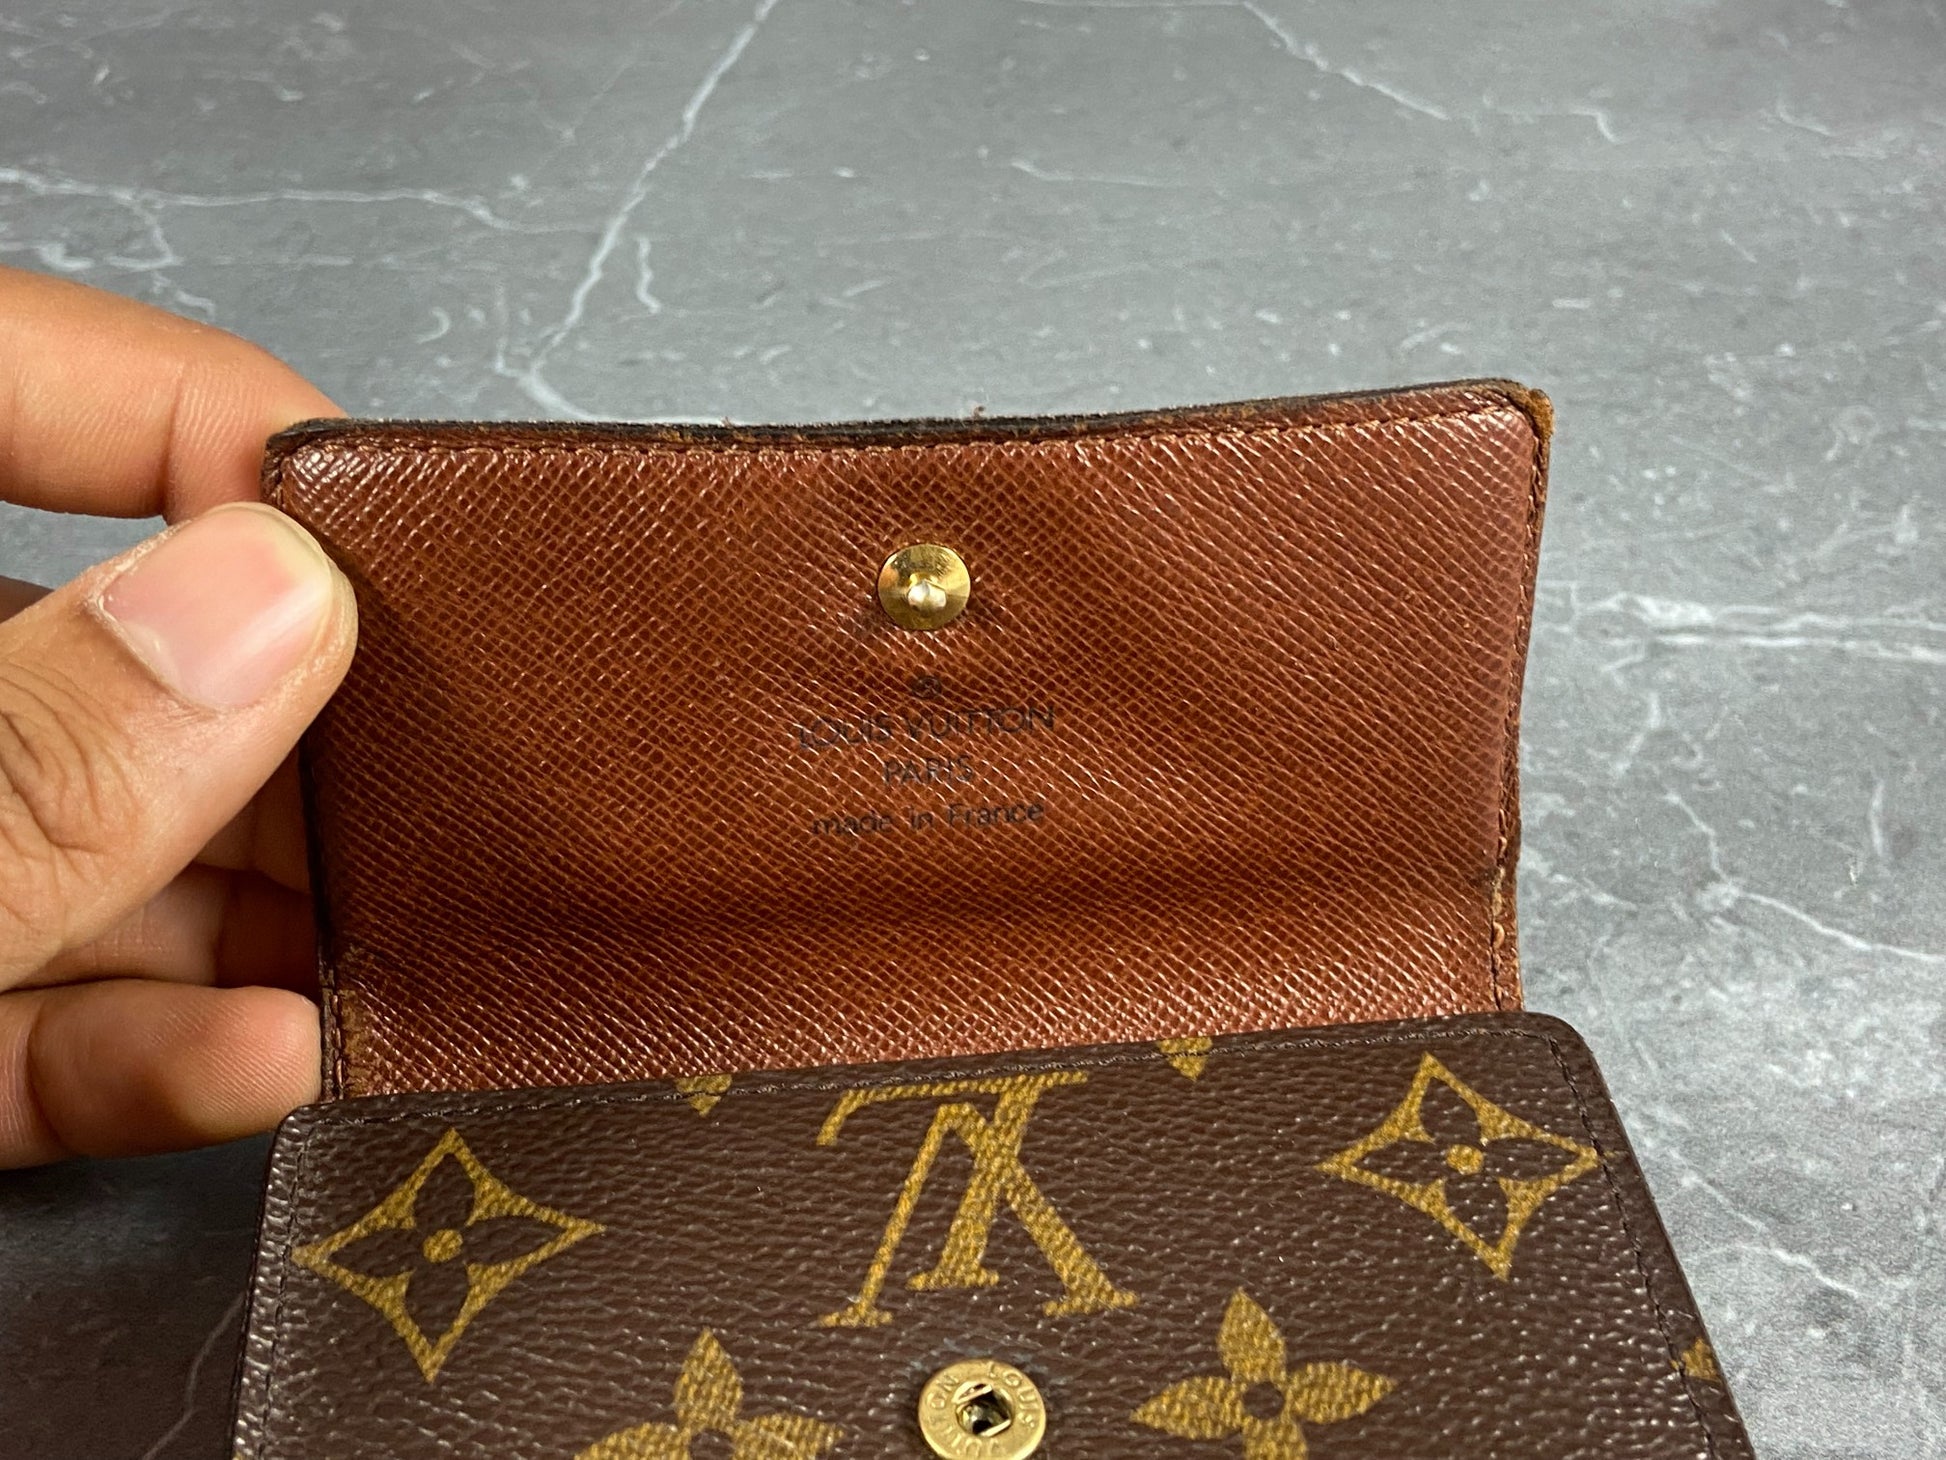 Pre-Owned Louis Vuitton Elise Wallet- 2240RY10 